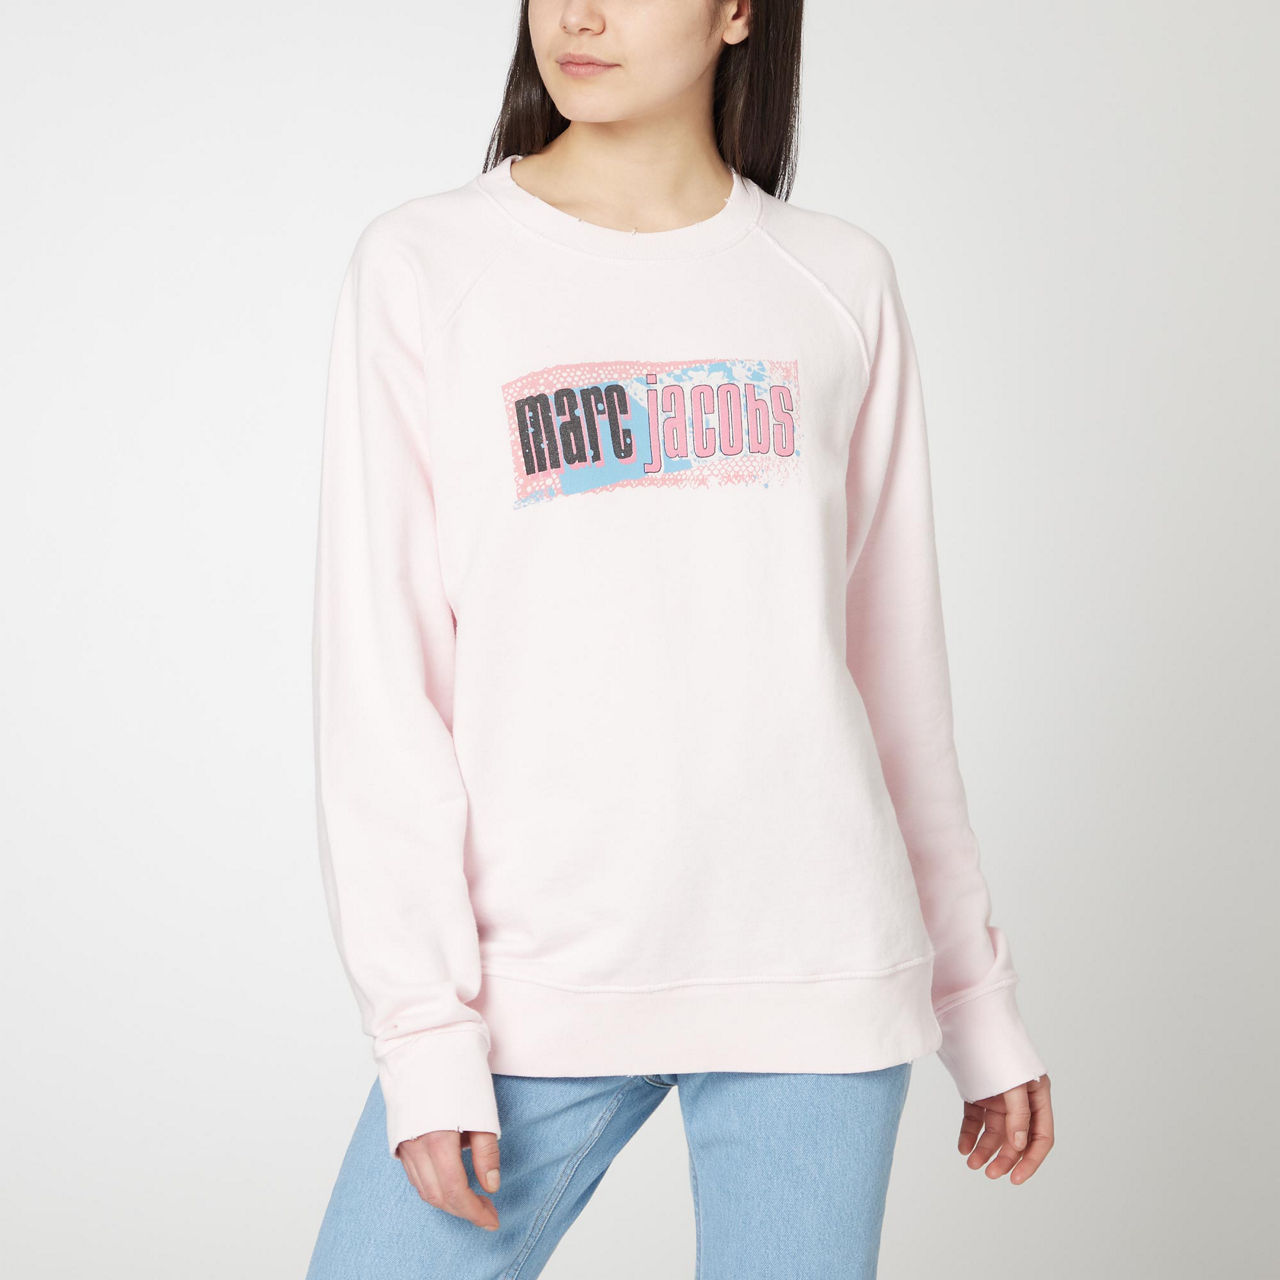 Marc Jacobs Ladies Pretty In Pink Sweatshirt, Size Small